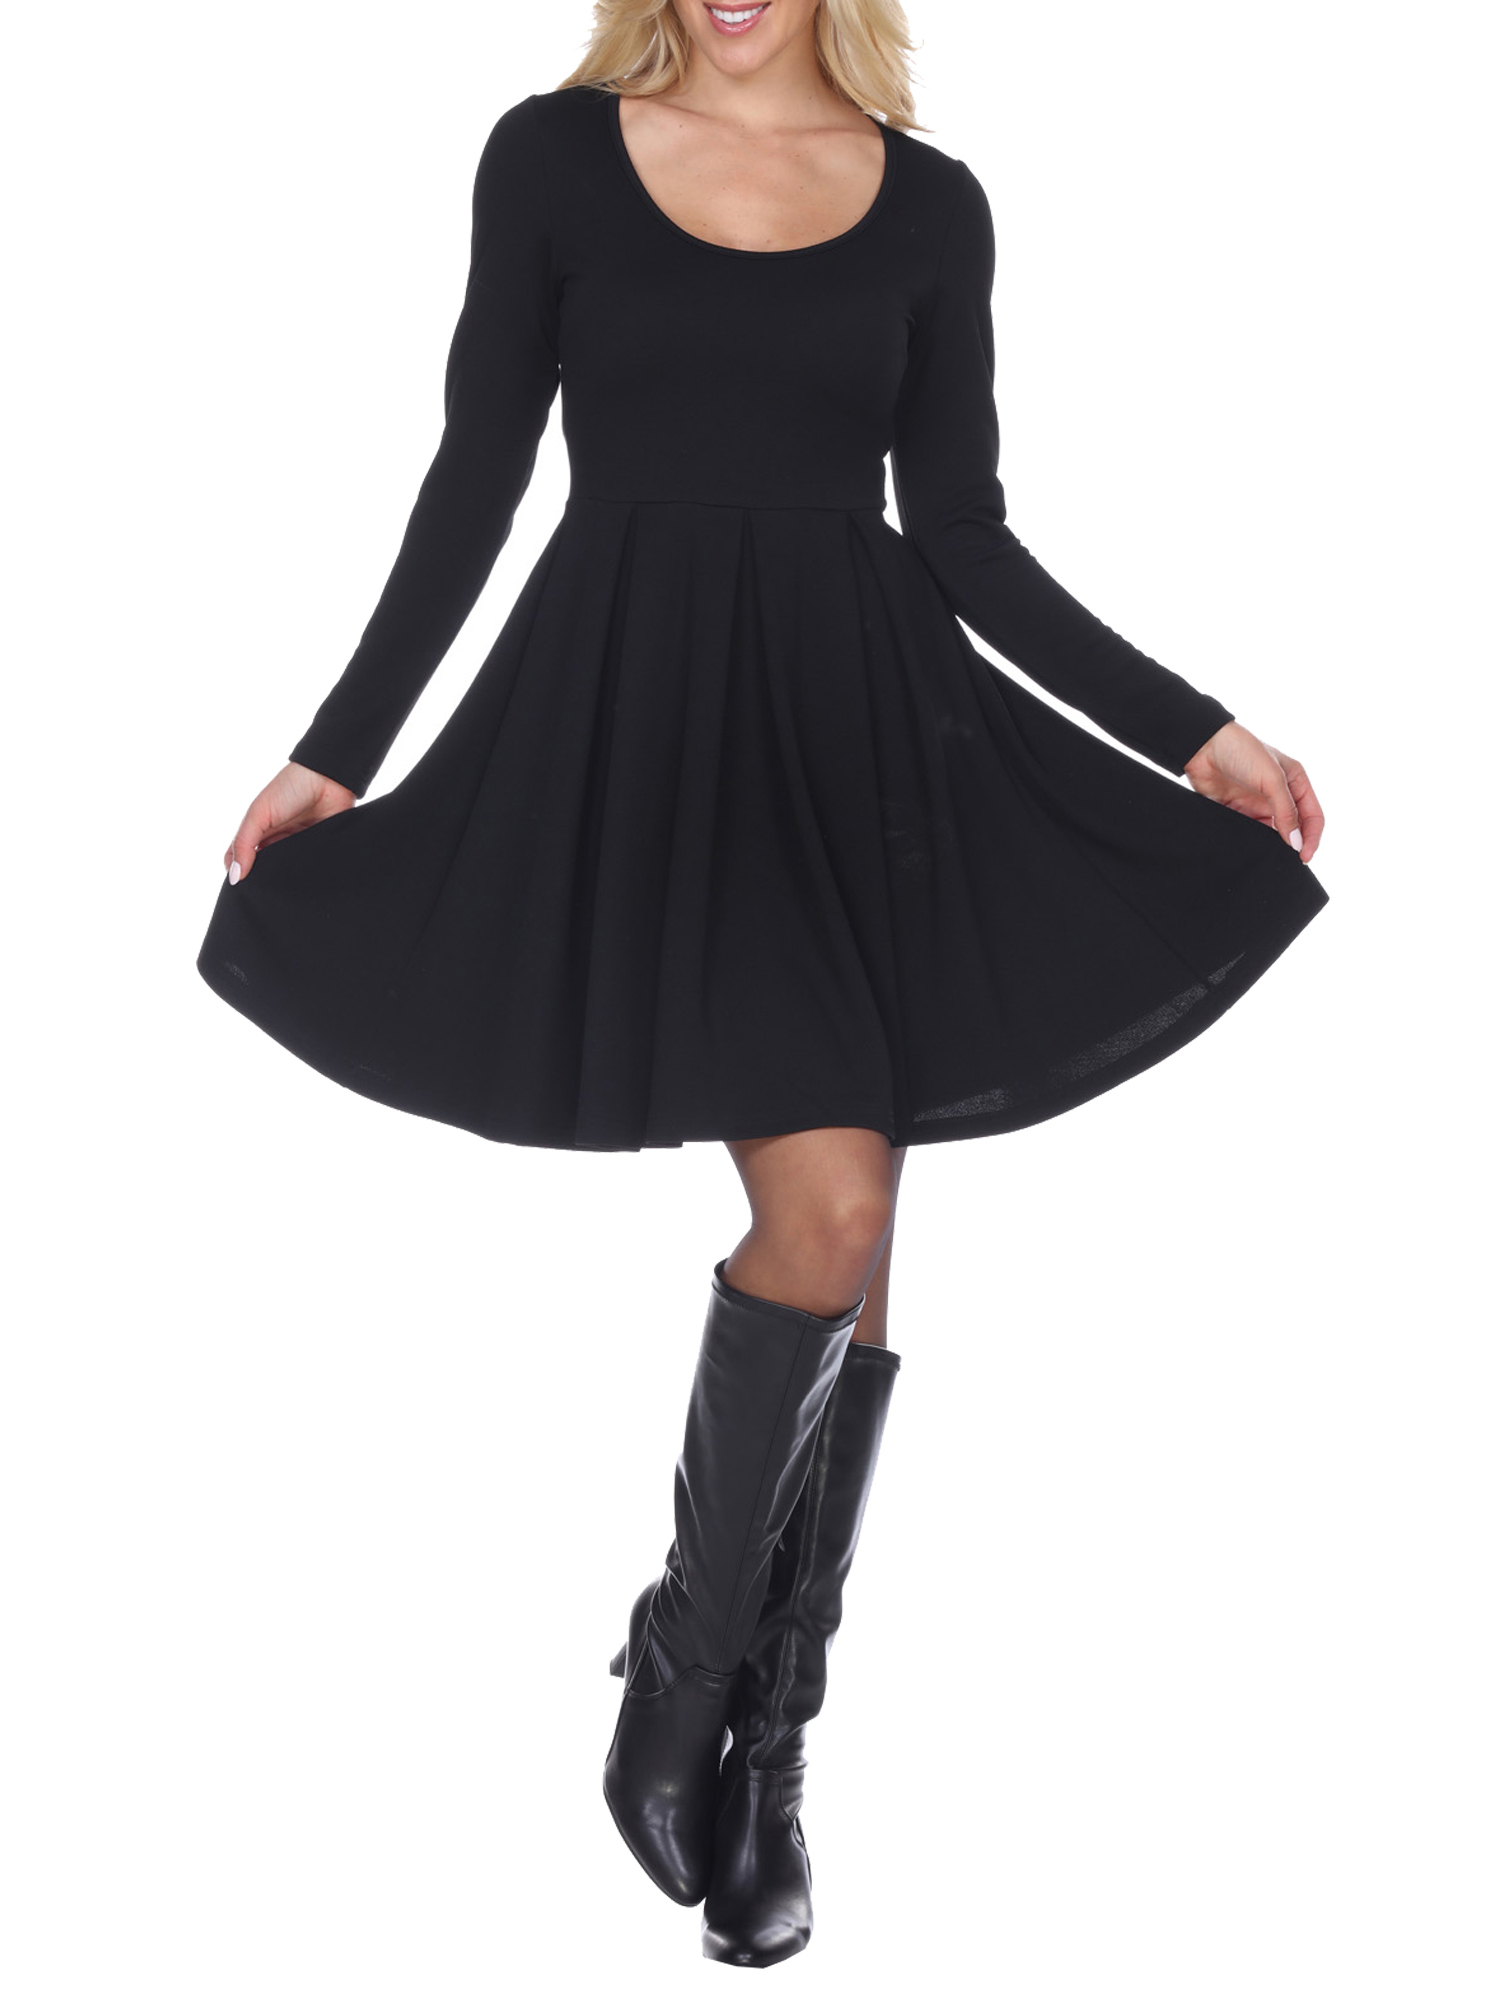 White Mark Women's Long Sleeve Fit and Flare Dress - image 1 of 4